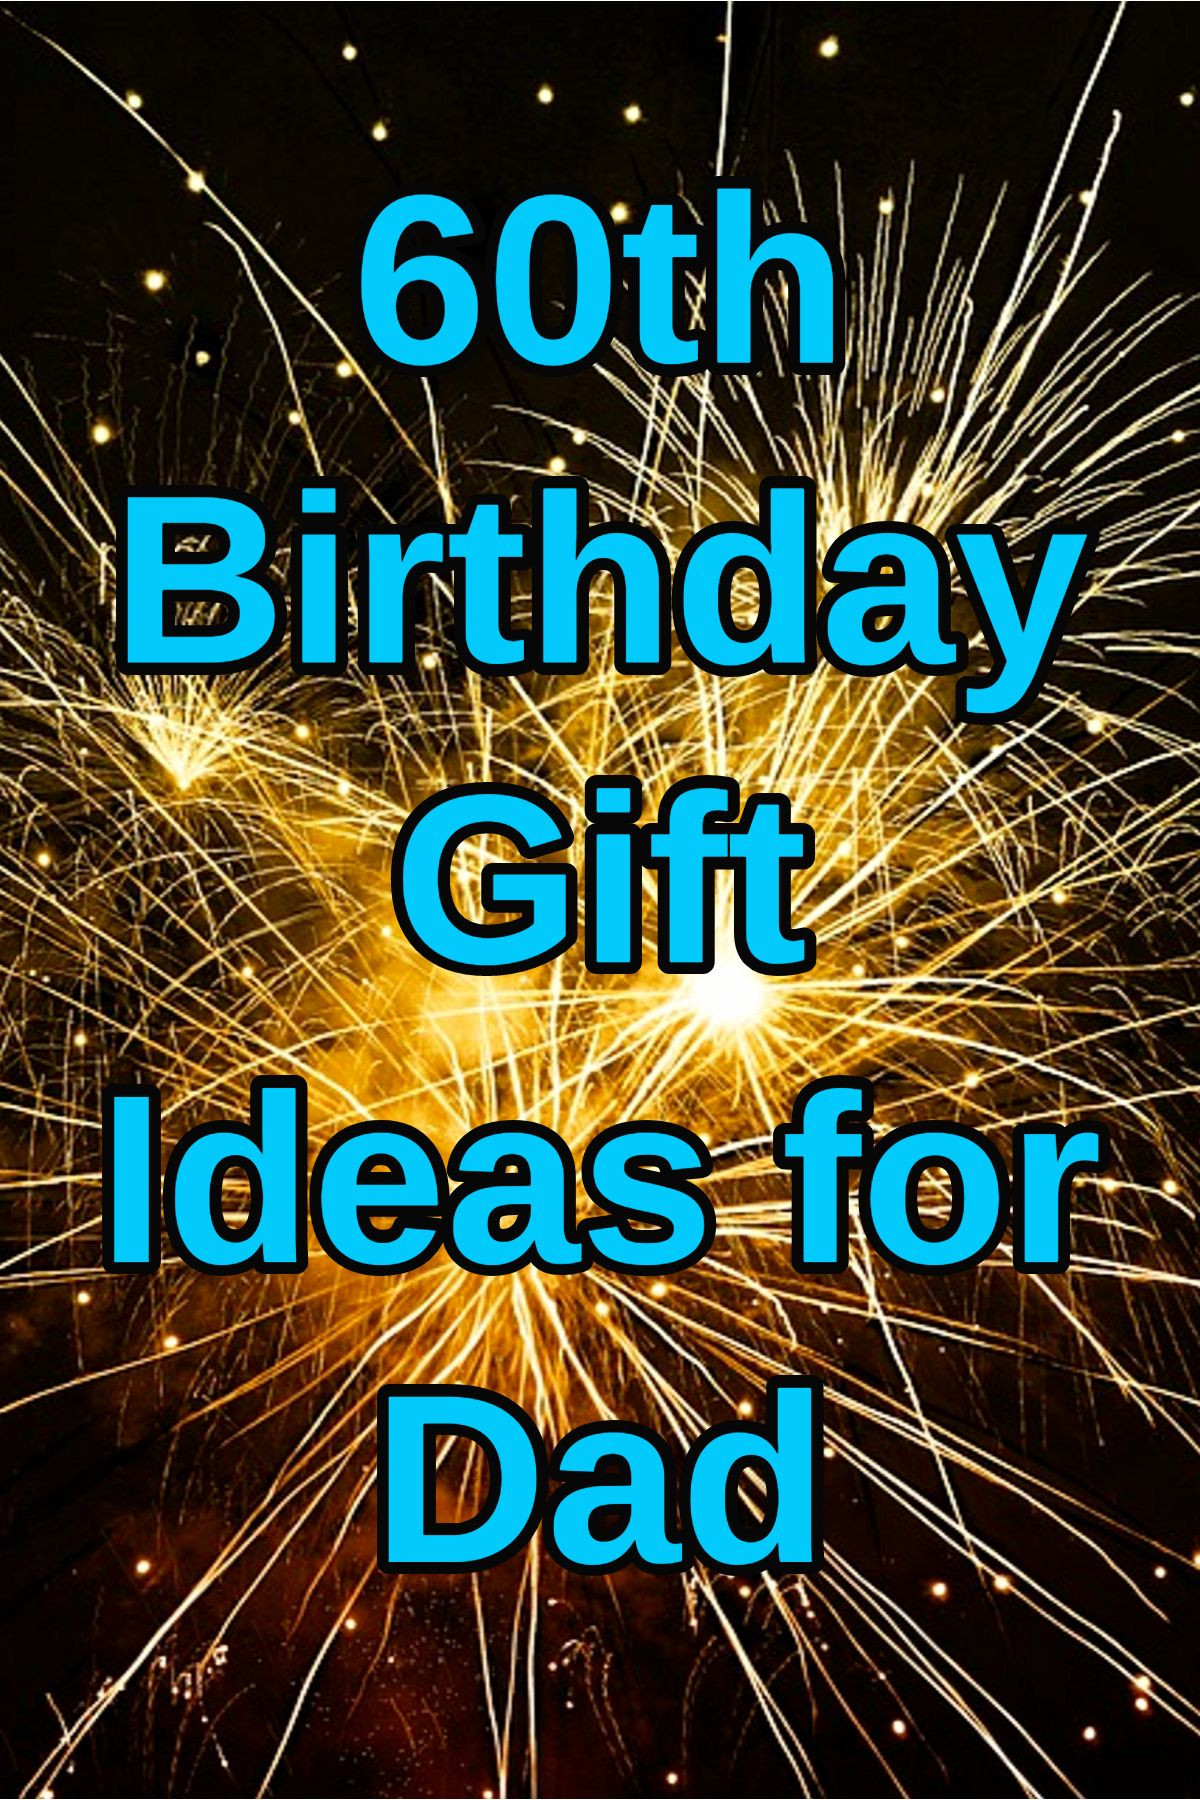 60Th Birthday Gift Ideas For Dad
 Best 60th Birthday Gift Ideas for Dad